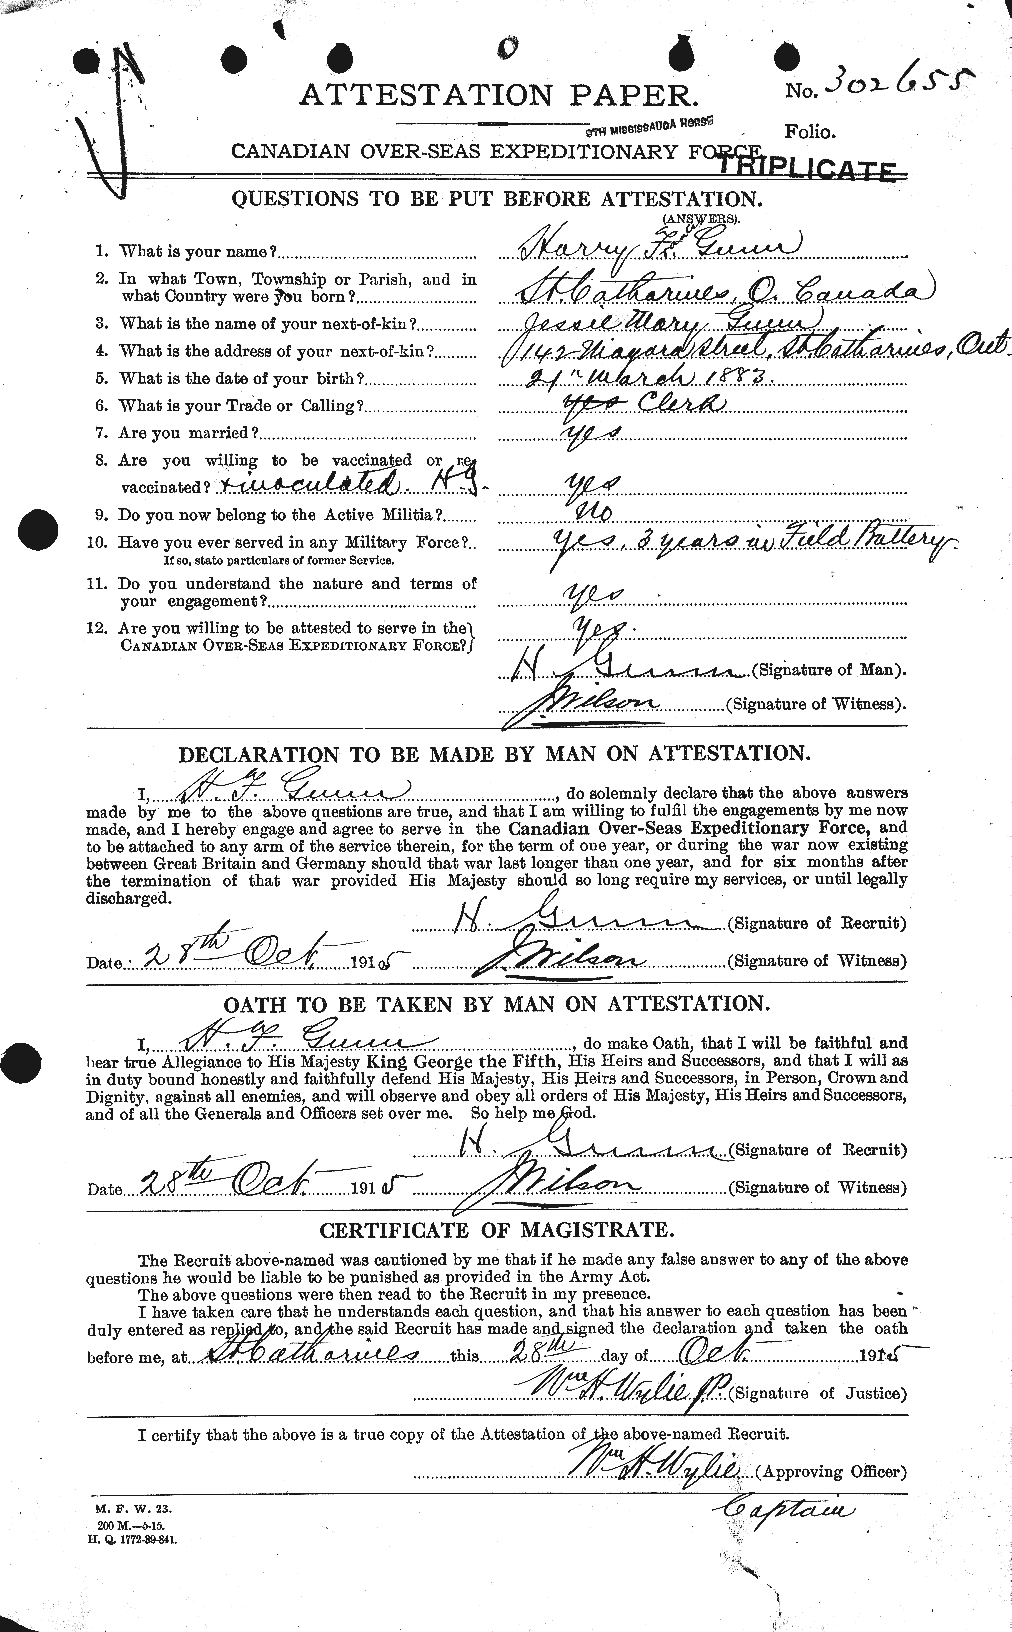 Personnel Records of the First World War - CEF 369252a